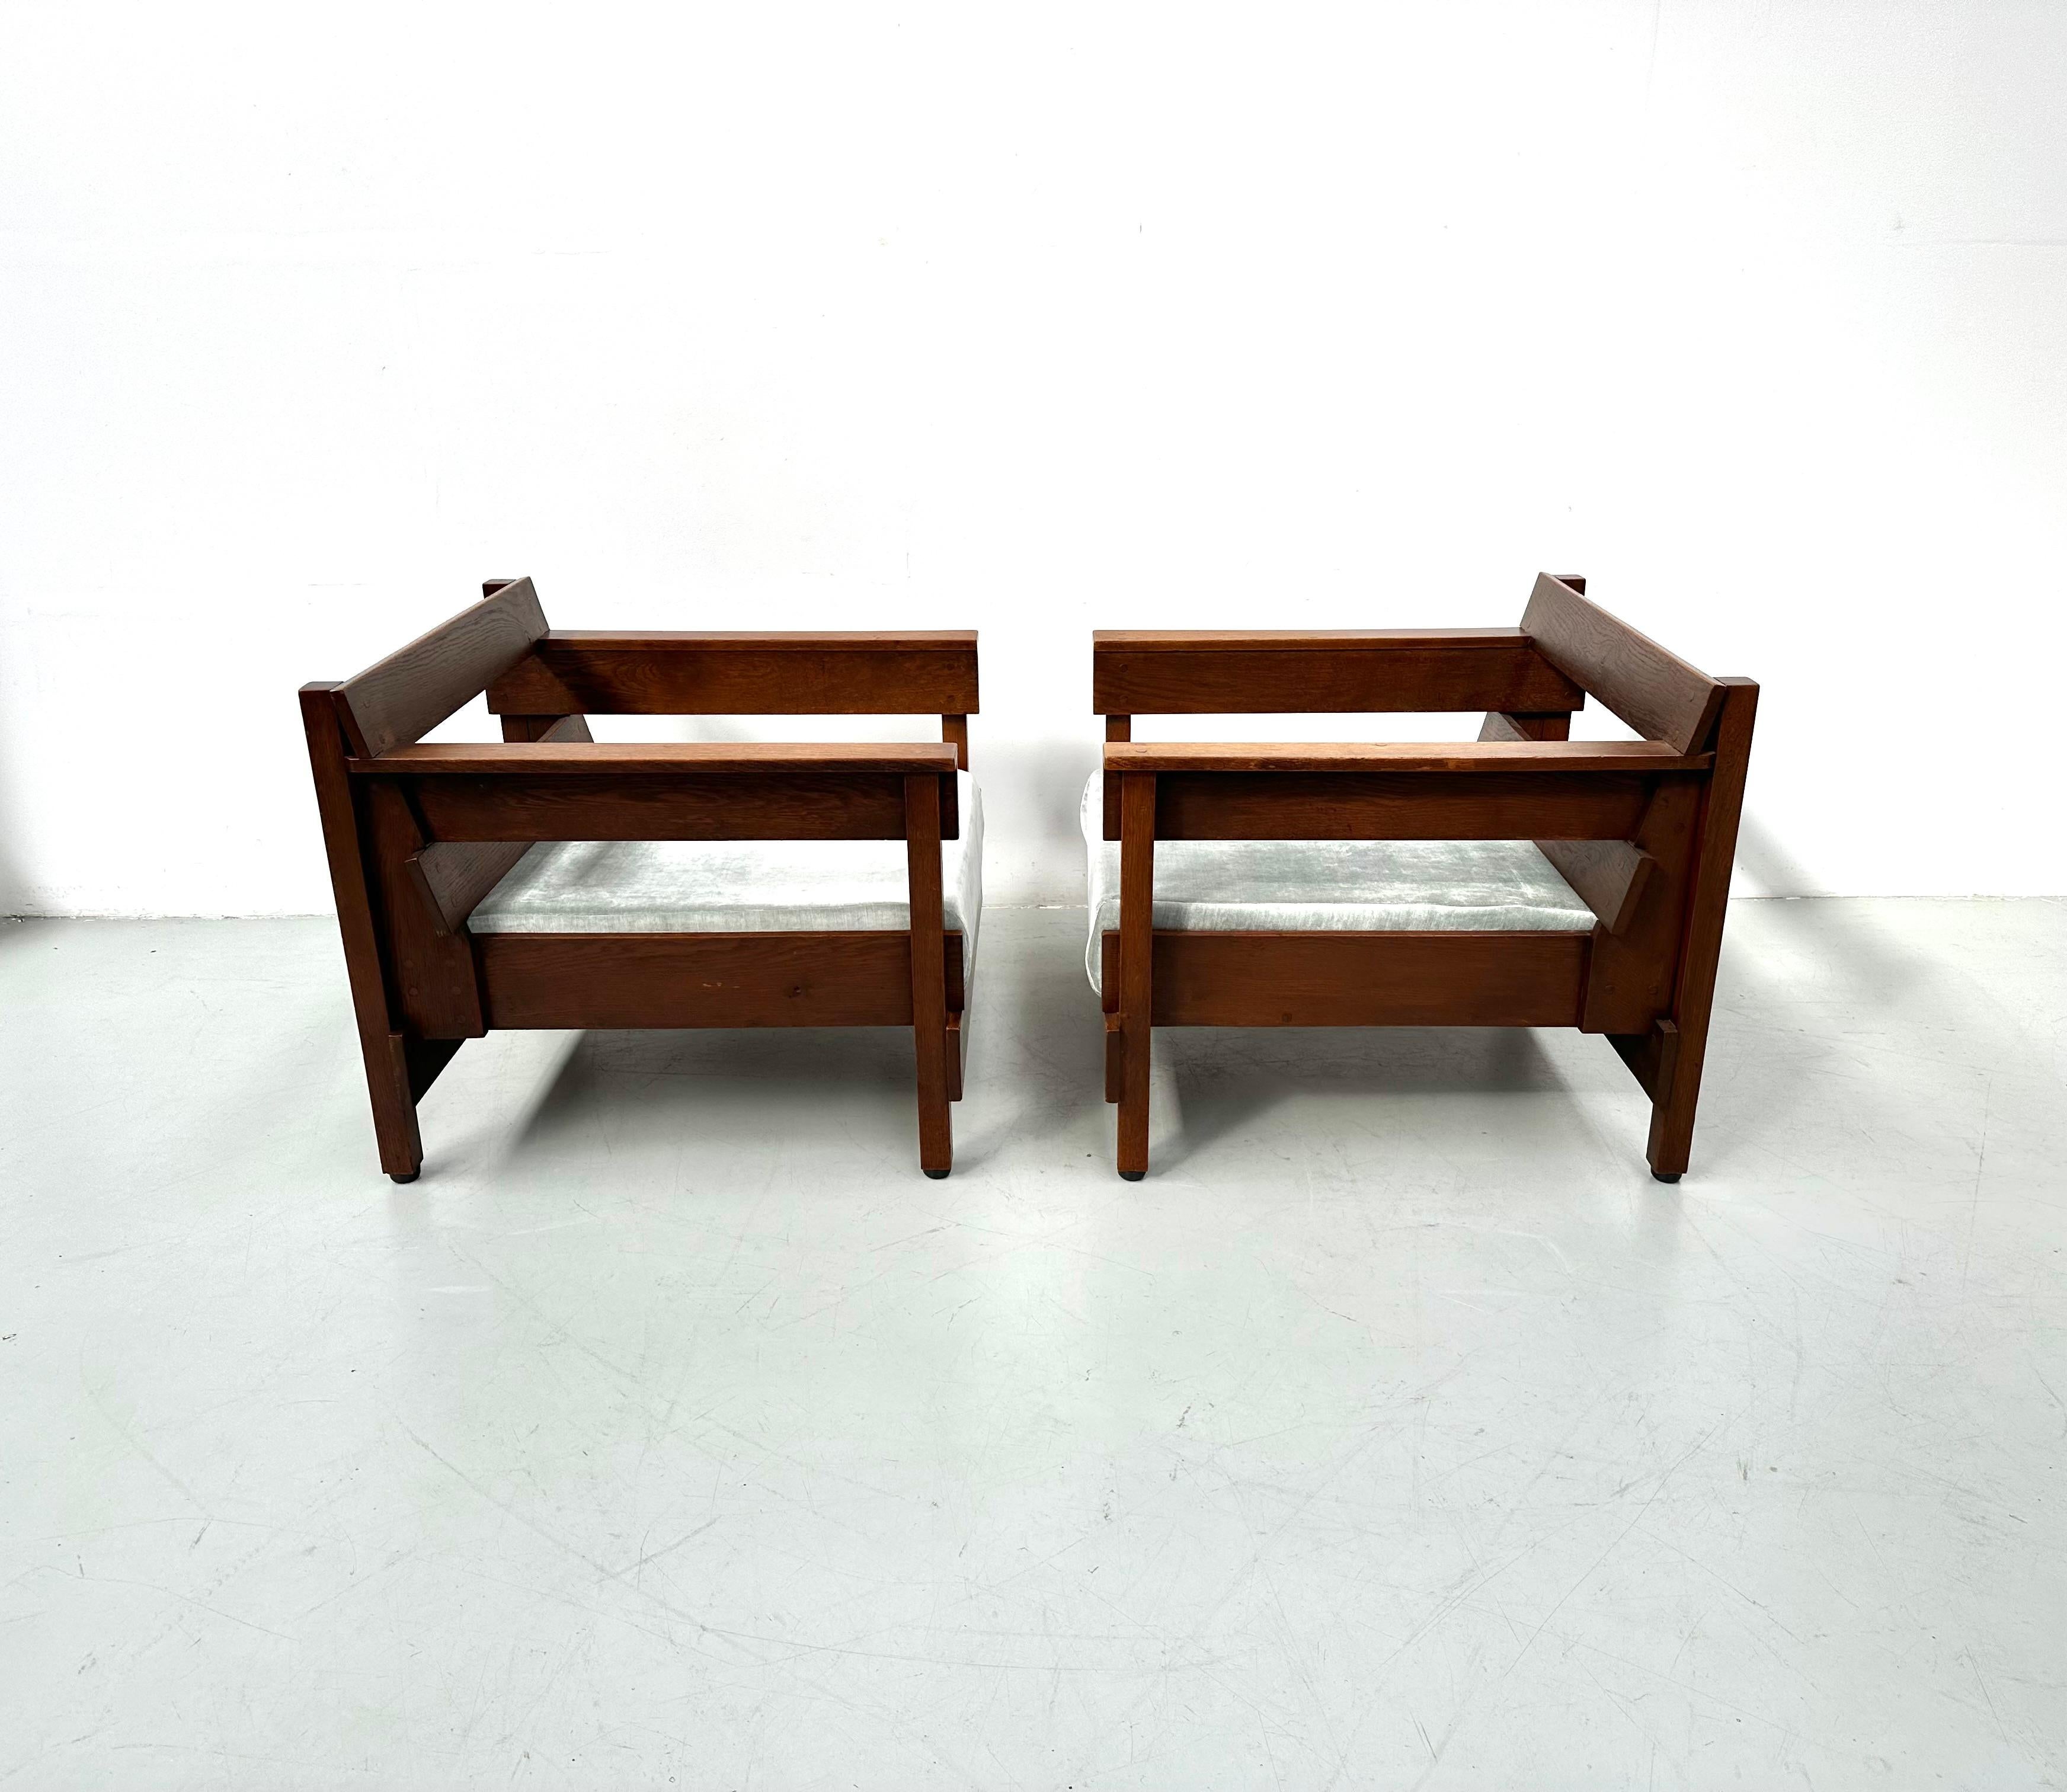 Dutch Mid Century Brutalist Oak Armchairs by Paul Bromberg for Metz & Co, 1950s. 6